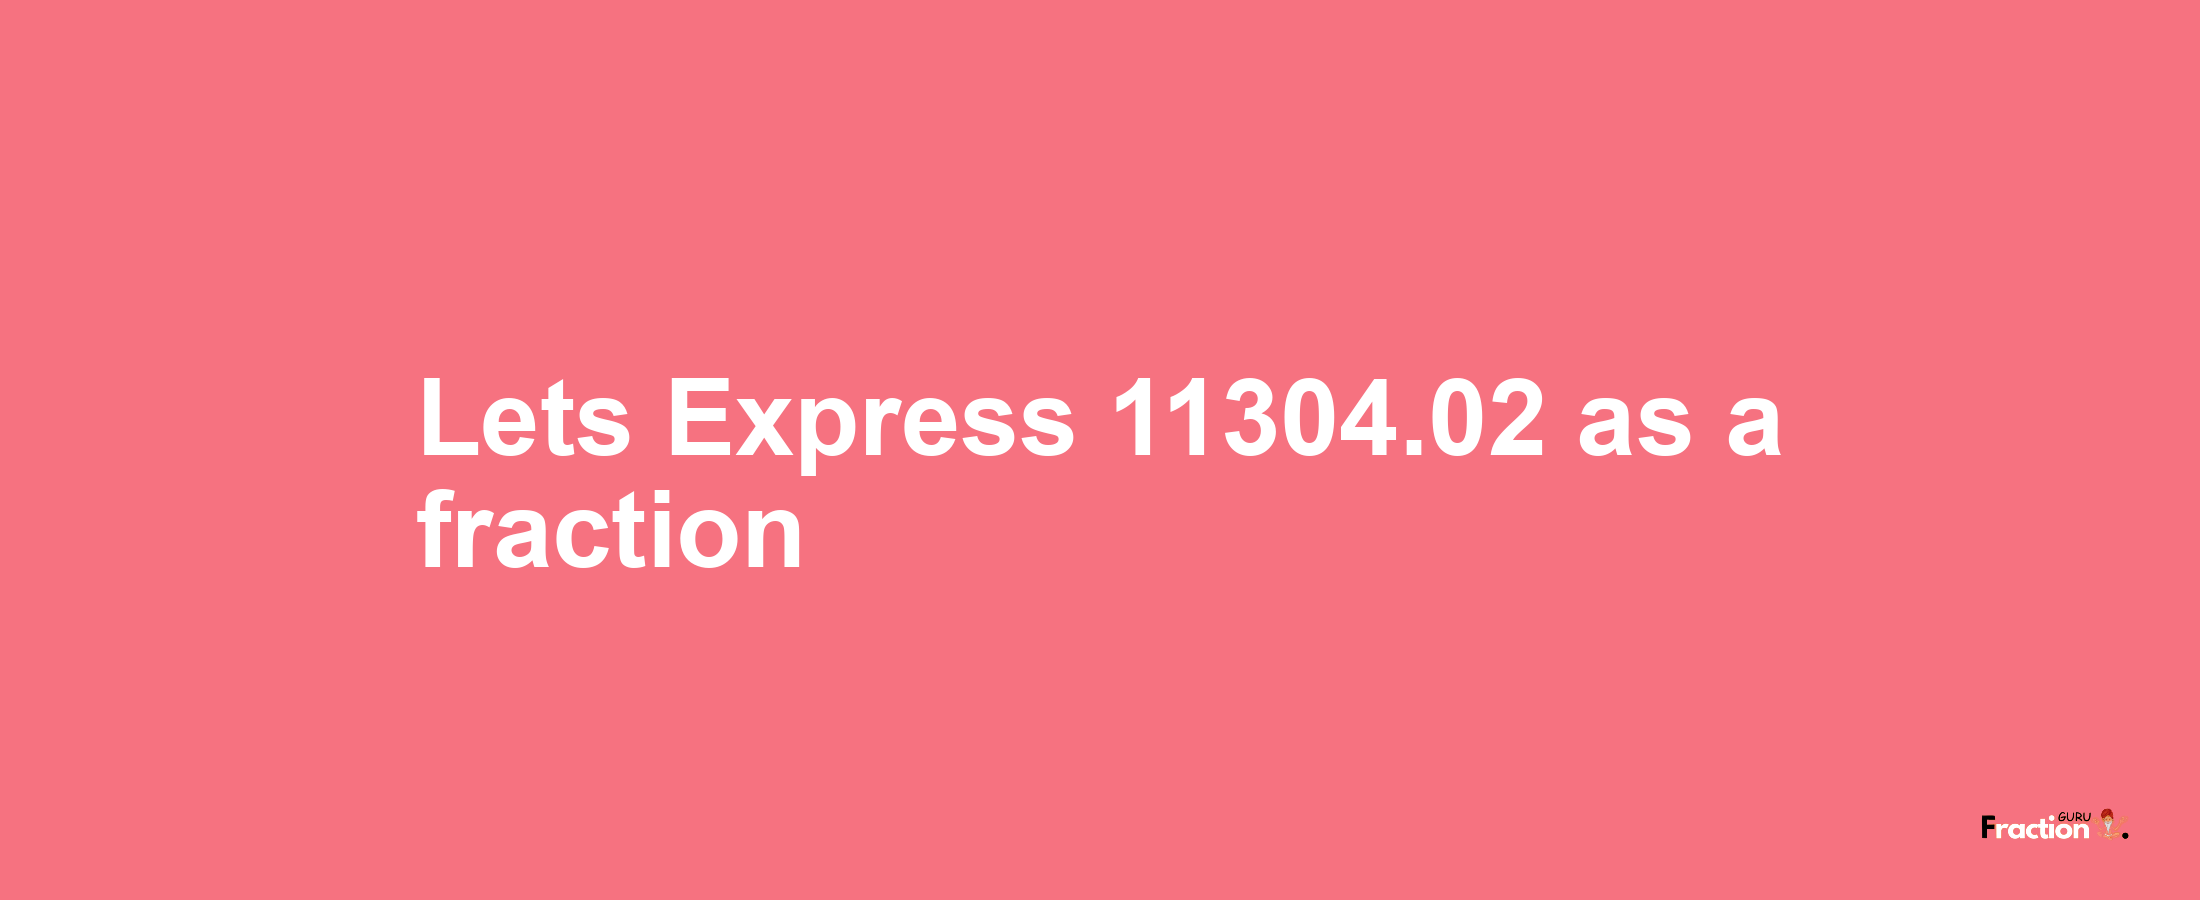 Lets Express 11304.02 as afraction